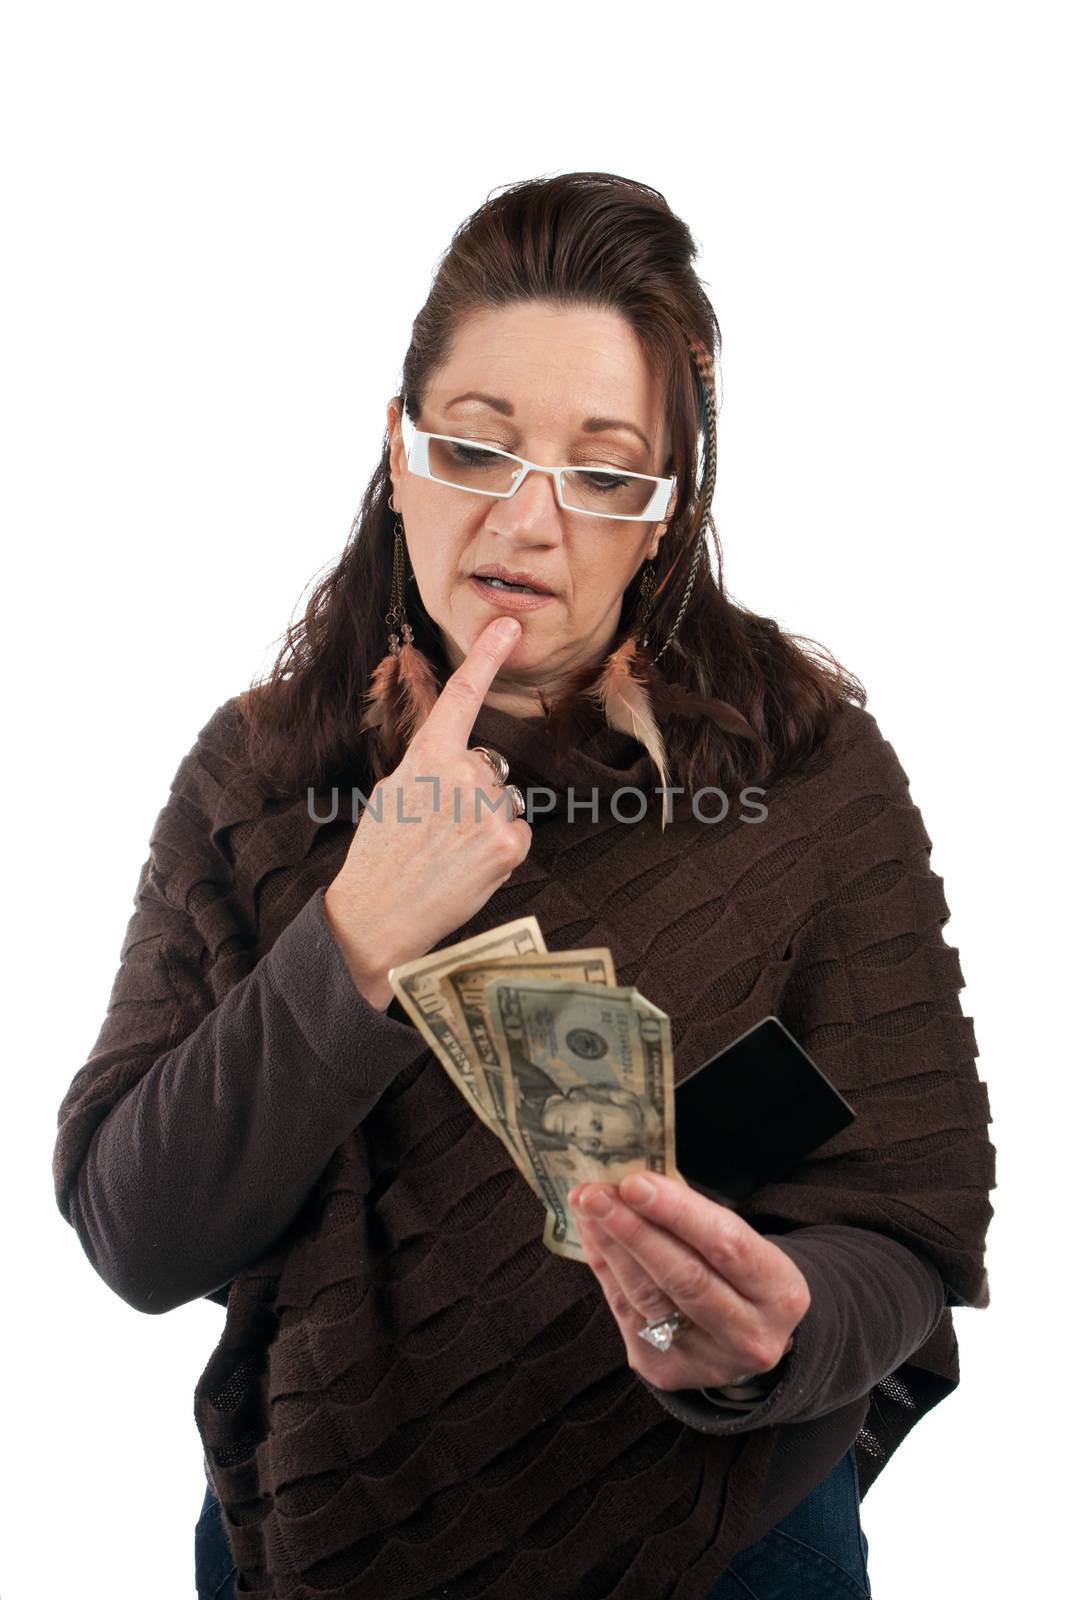 Middle aged woman carefully trying to decide between using old fashioned cash or a plastic credit or gift card.